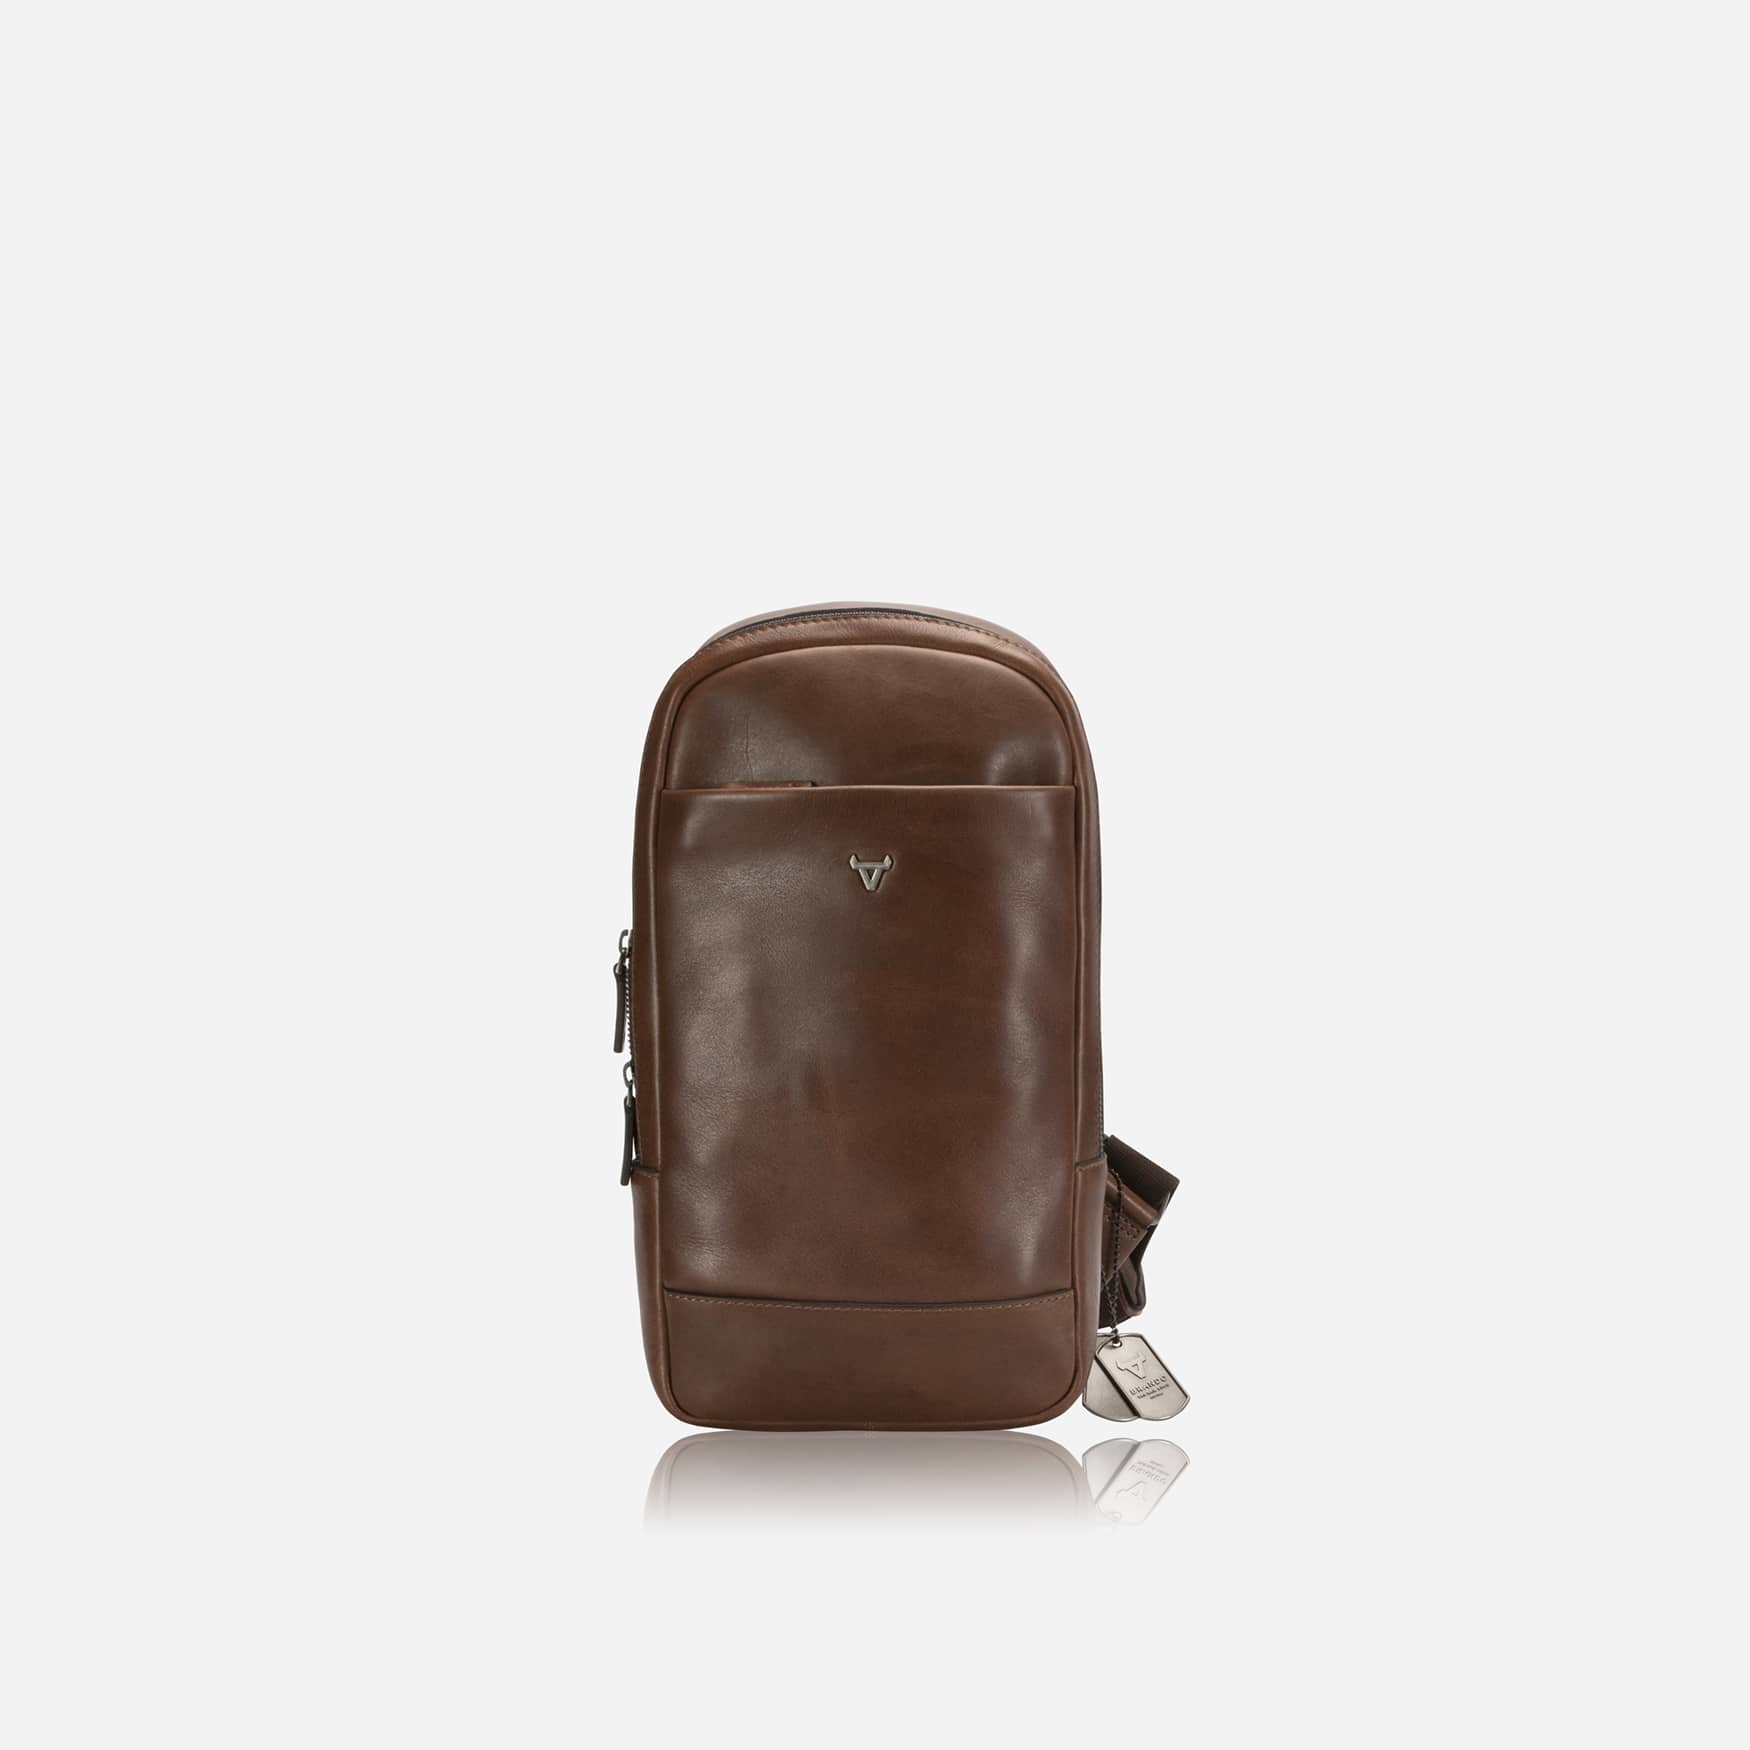 Brosnan One Strap Backpack, Brown